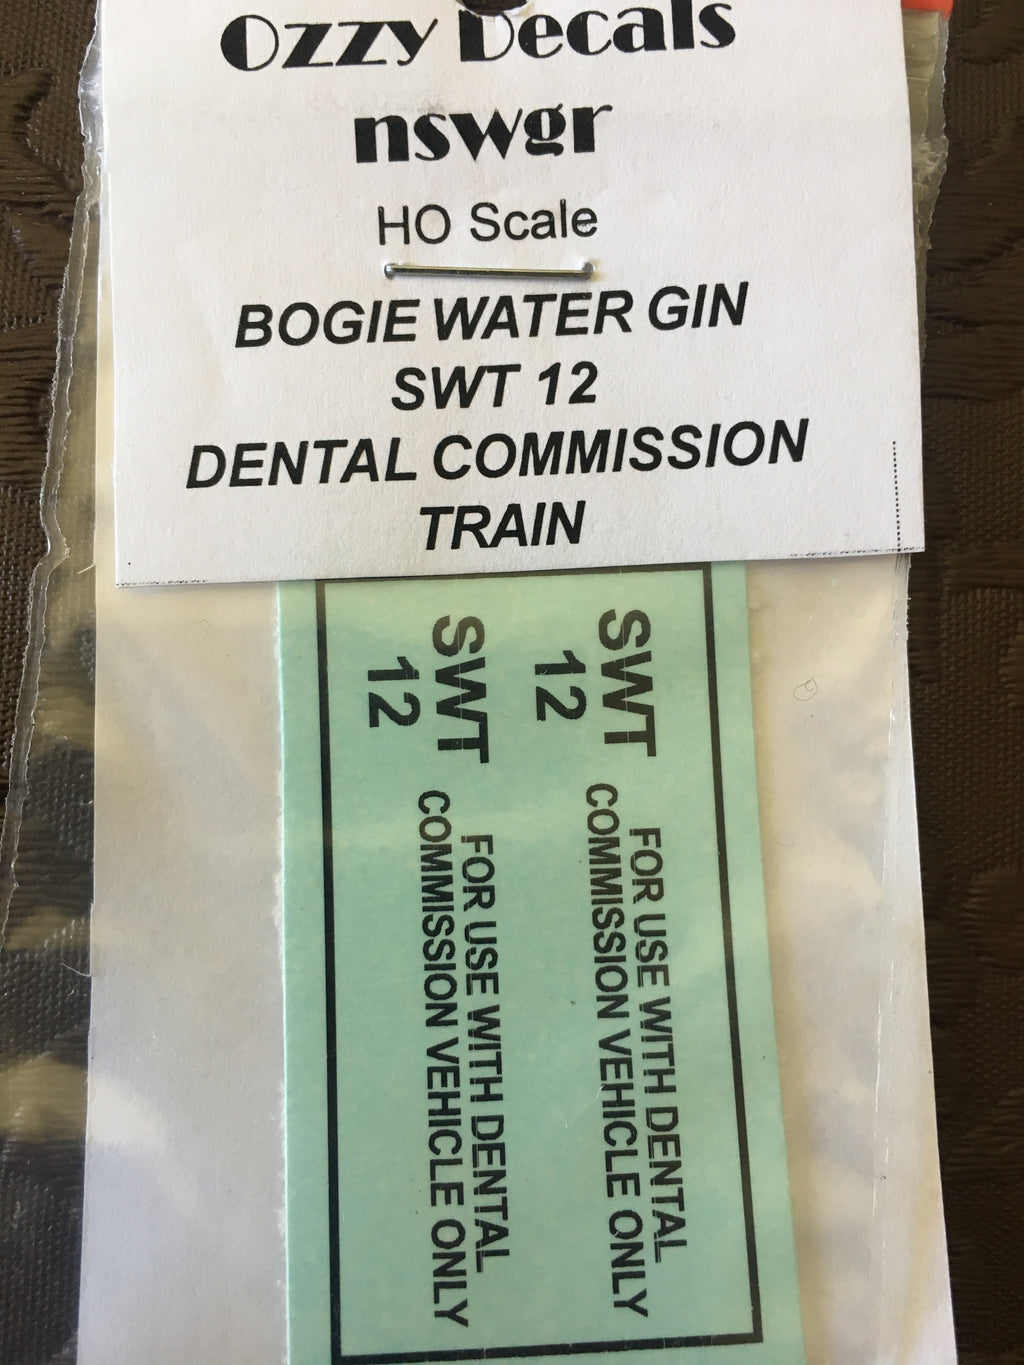 GIN Ozzy Decals: Bogie Water Gin: SWT 12 Dental Commission Train